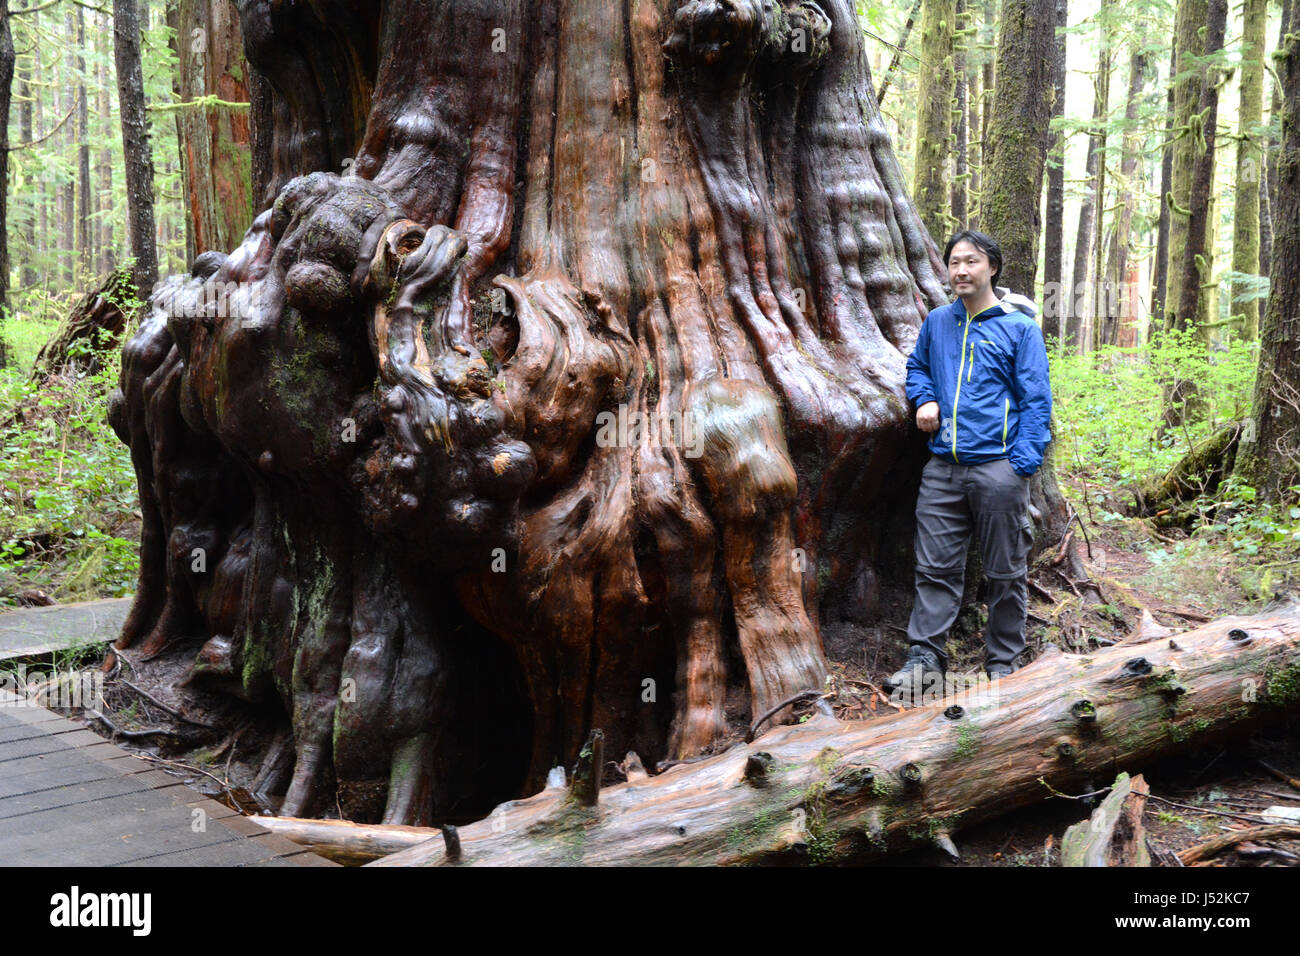 An environmentalist stands beside a giant western red cedar in Avatar Grove, an old growth forest on Vancouver Island, British Columbia, Canada. Stock Photo